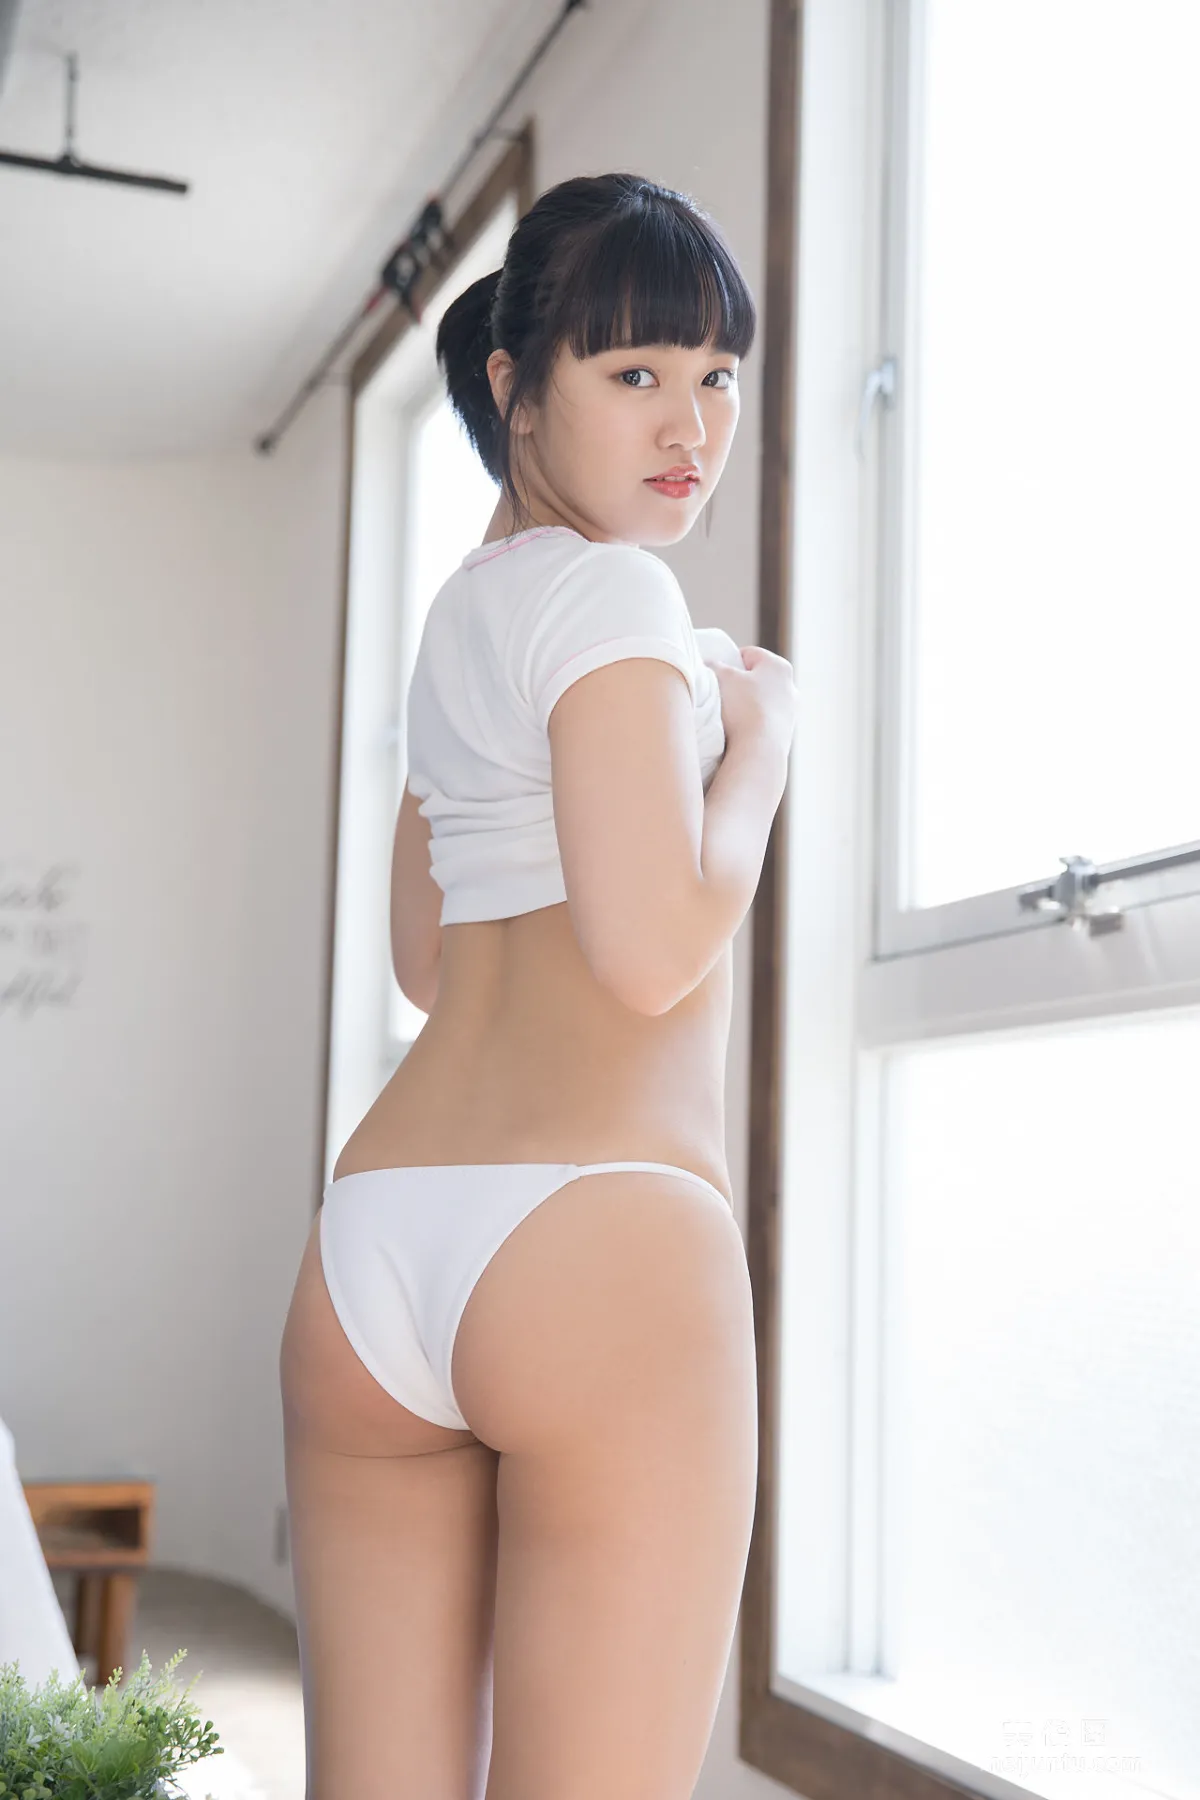 [Minisuka.tv] 香月りお - Limited Gallery 15.342